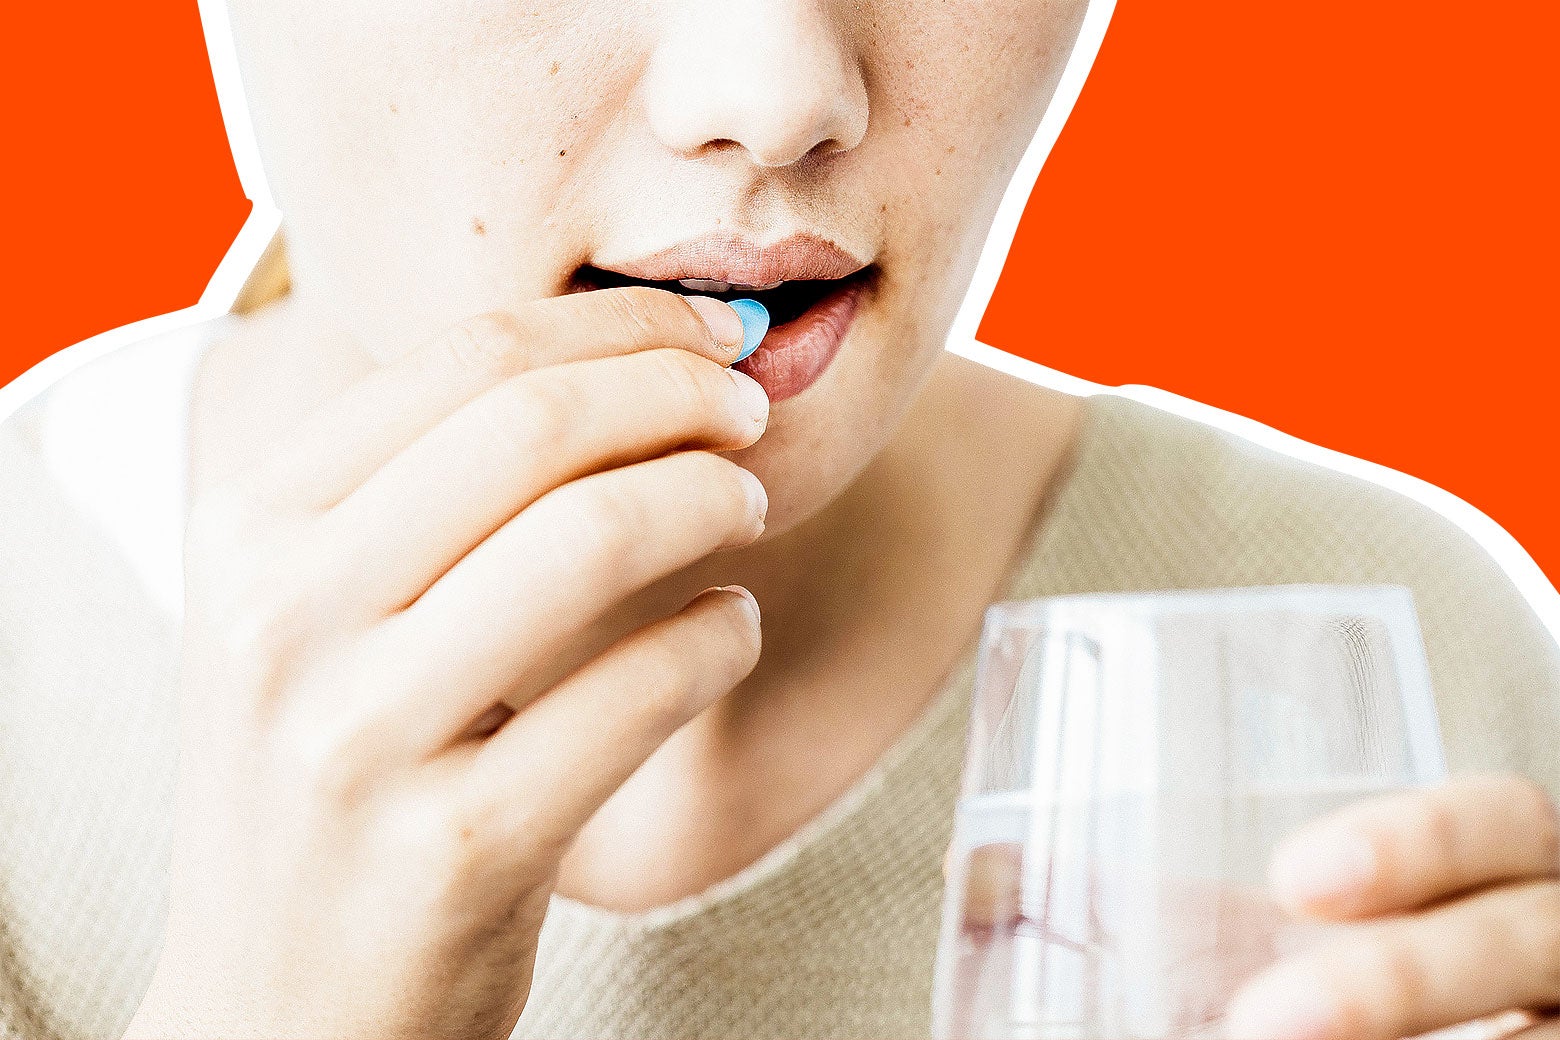 Photo illustration: a stock image of a woman taking a pill against an orange background.